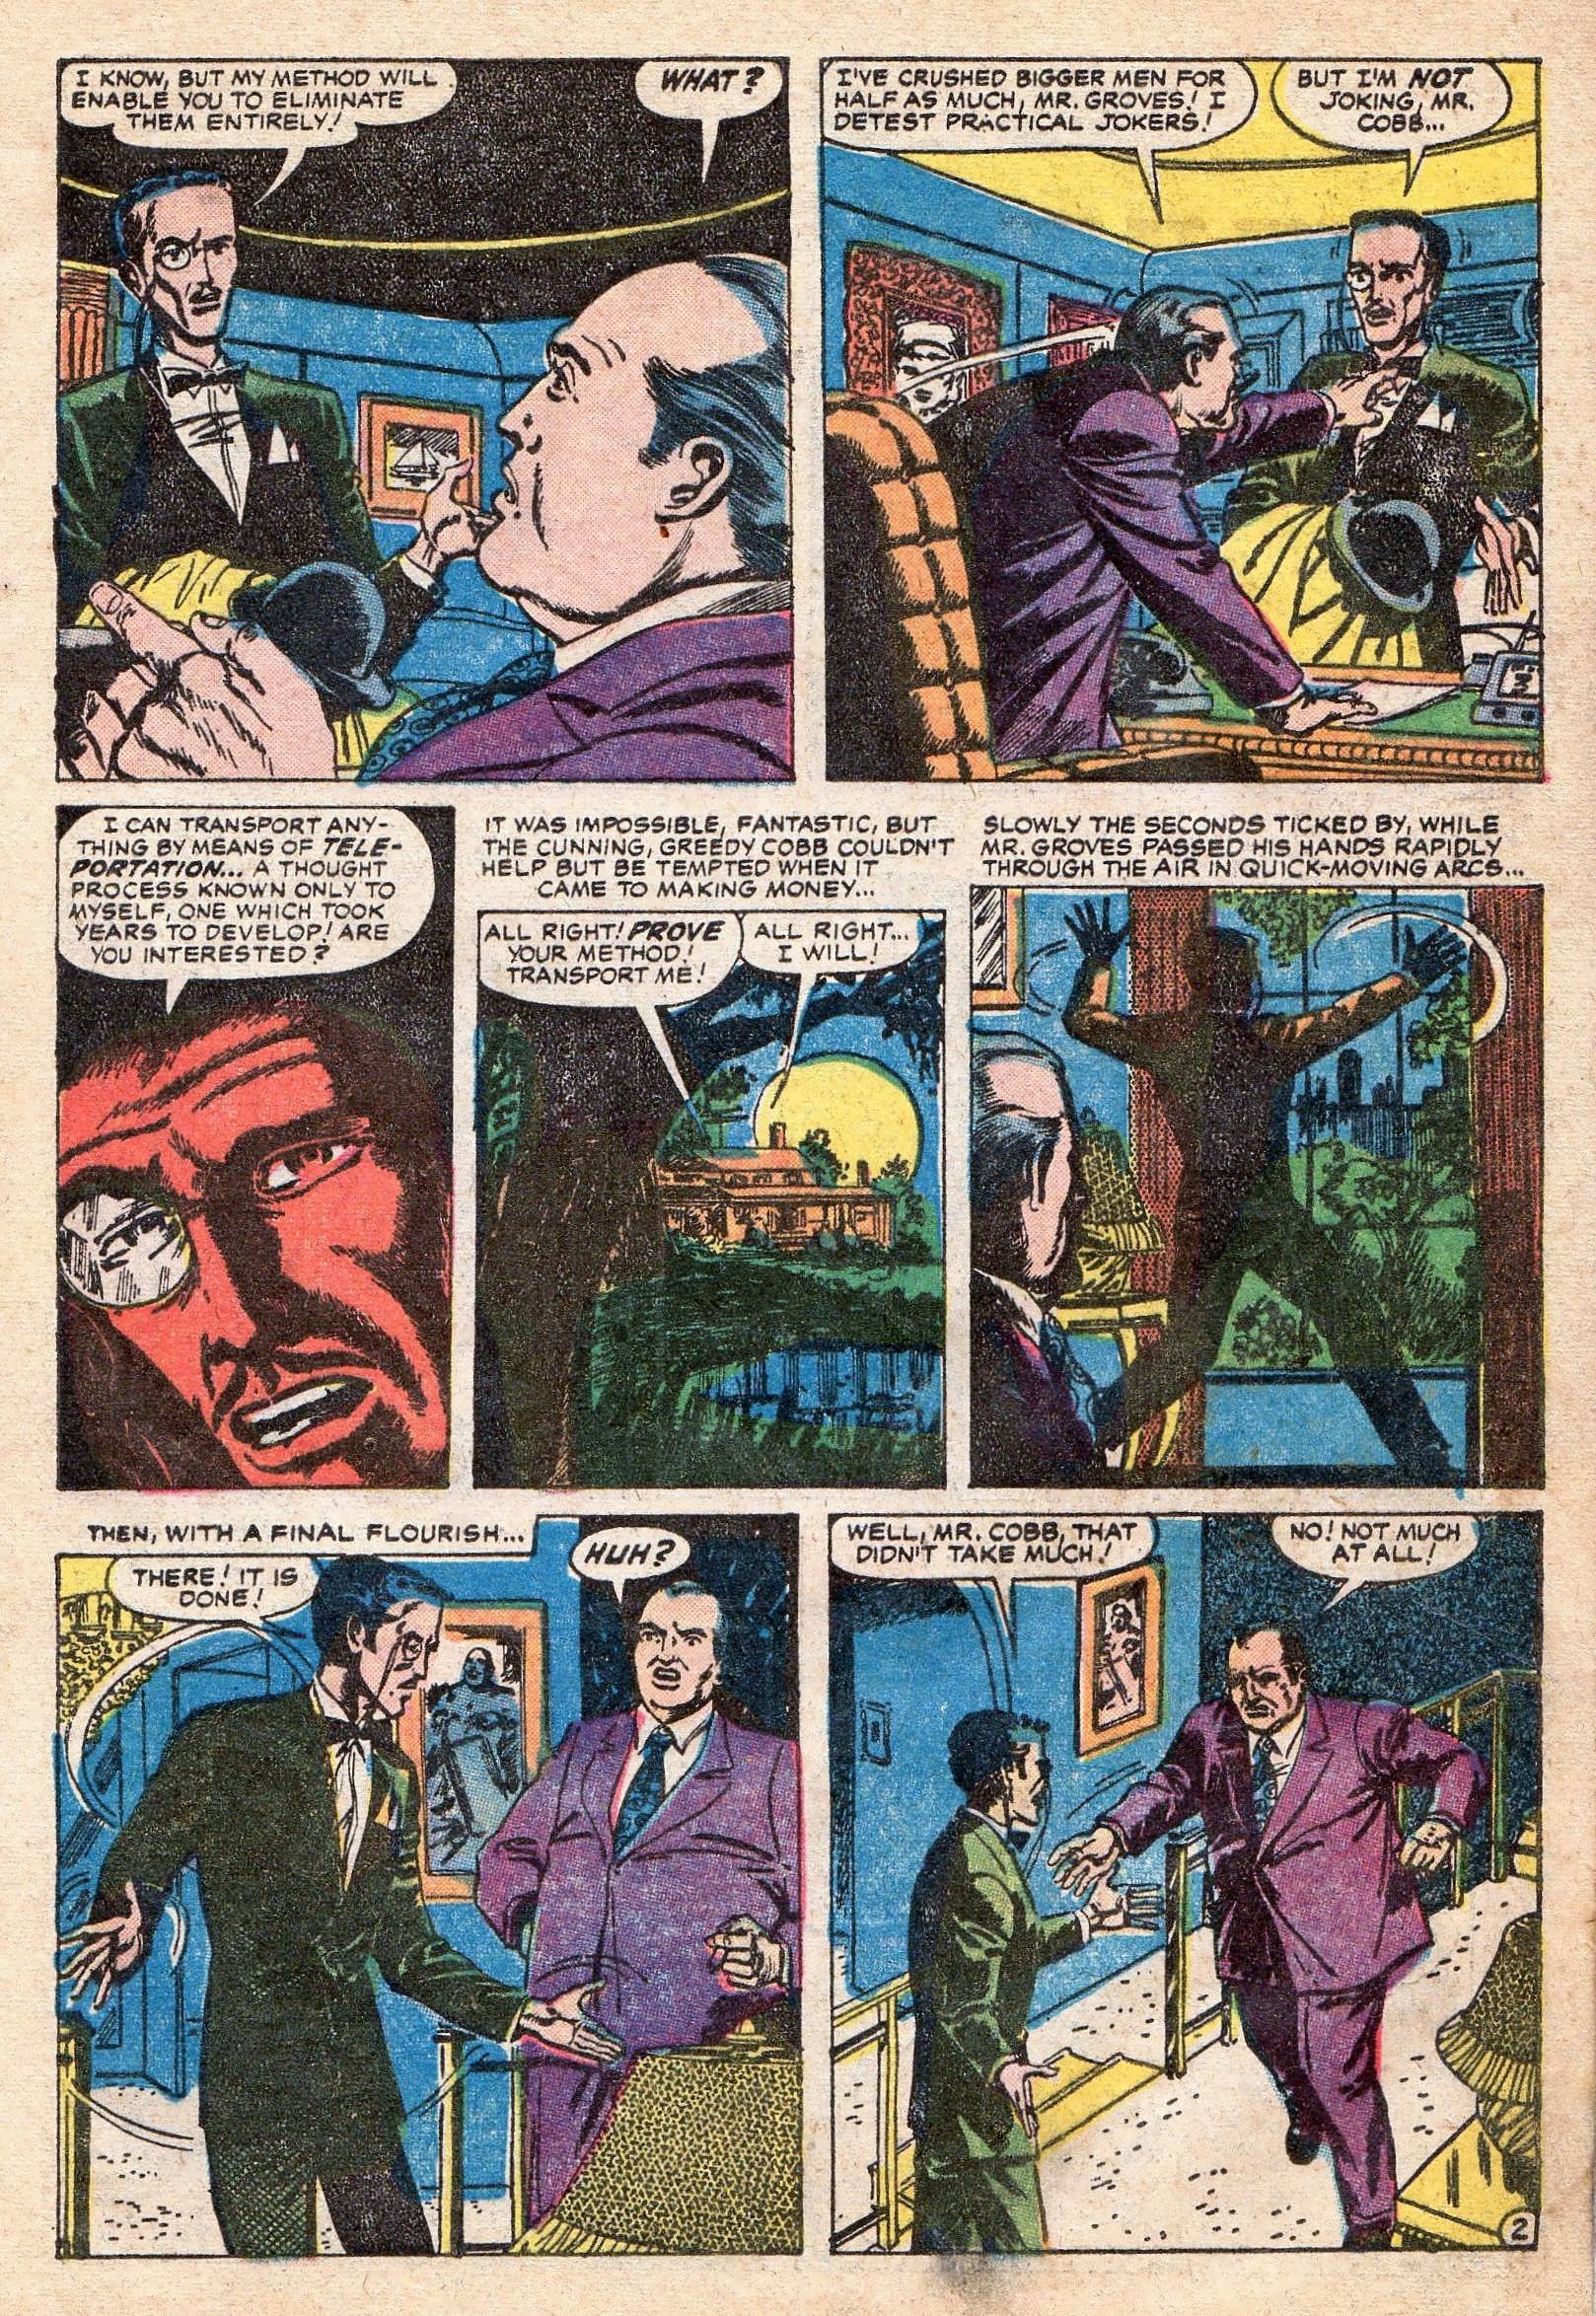 Marvel Tales (1949) 158 Page 12